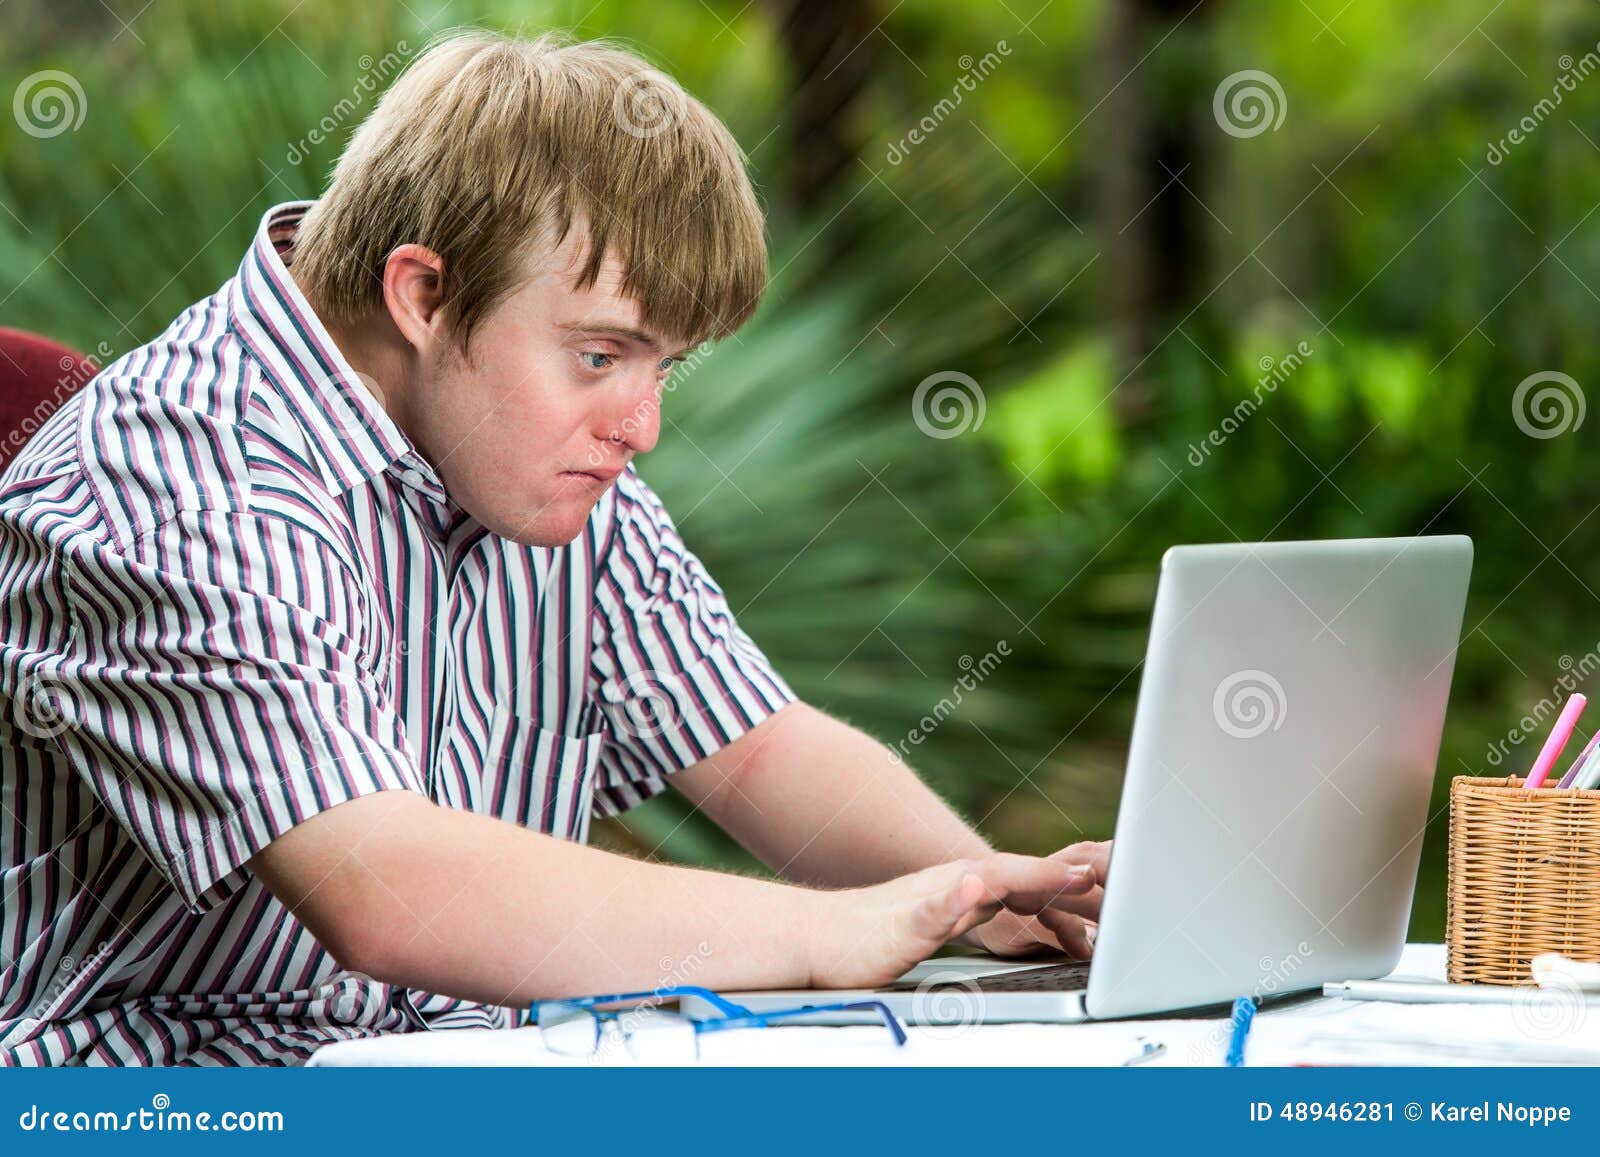 Concentrated Handicapped Boy Typing On Laptop. Stock Image - Image of